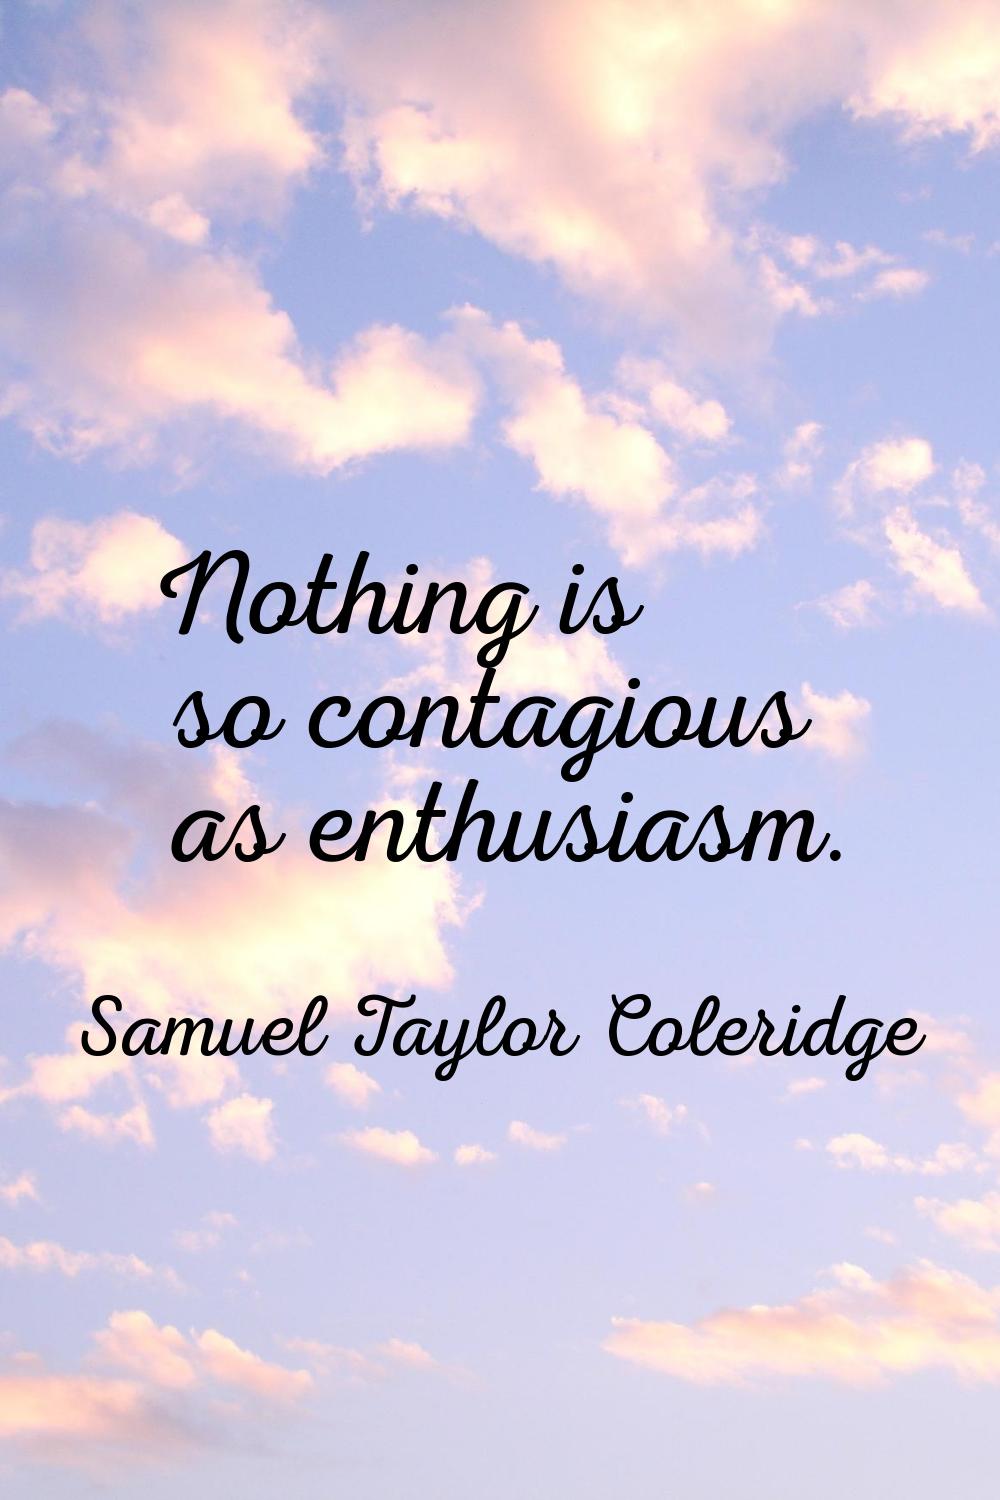 Nothing is so contagious as enthusiasm.